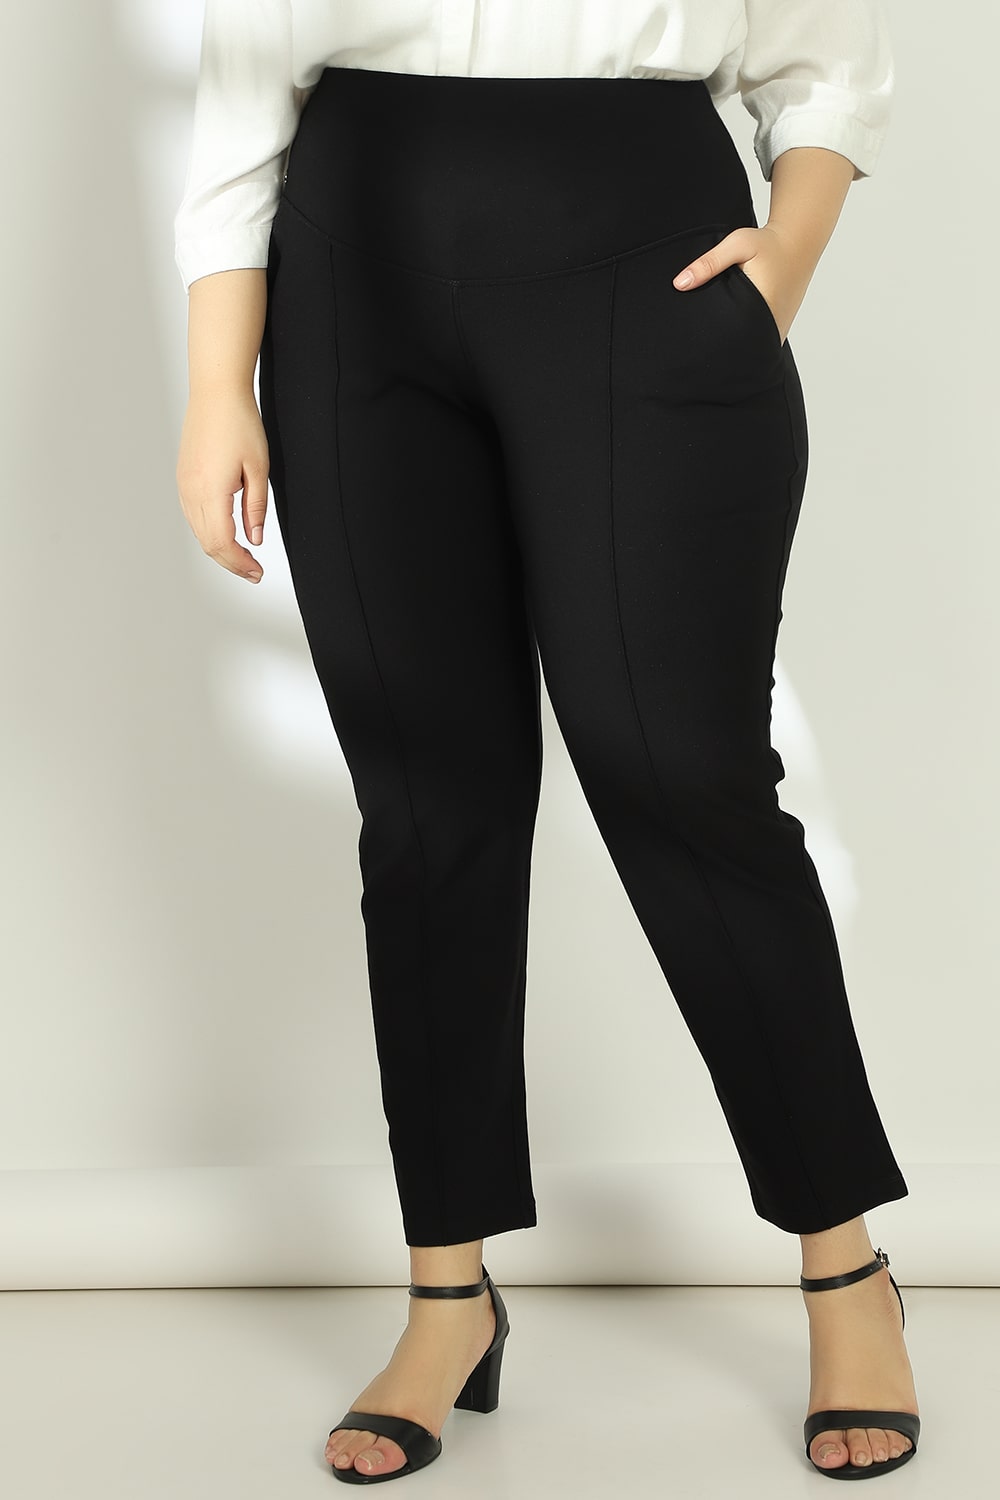 Buy Plus Size Crease Seam Black Straight Fit Pant Online